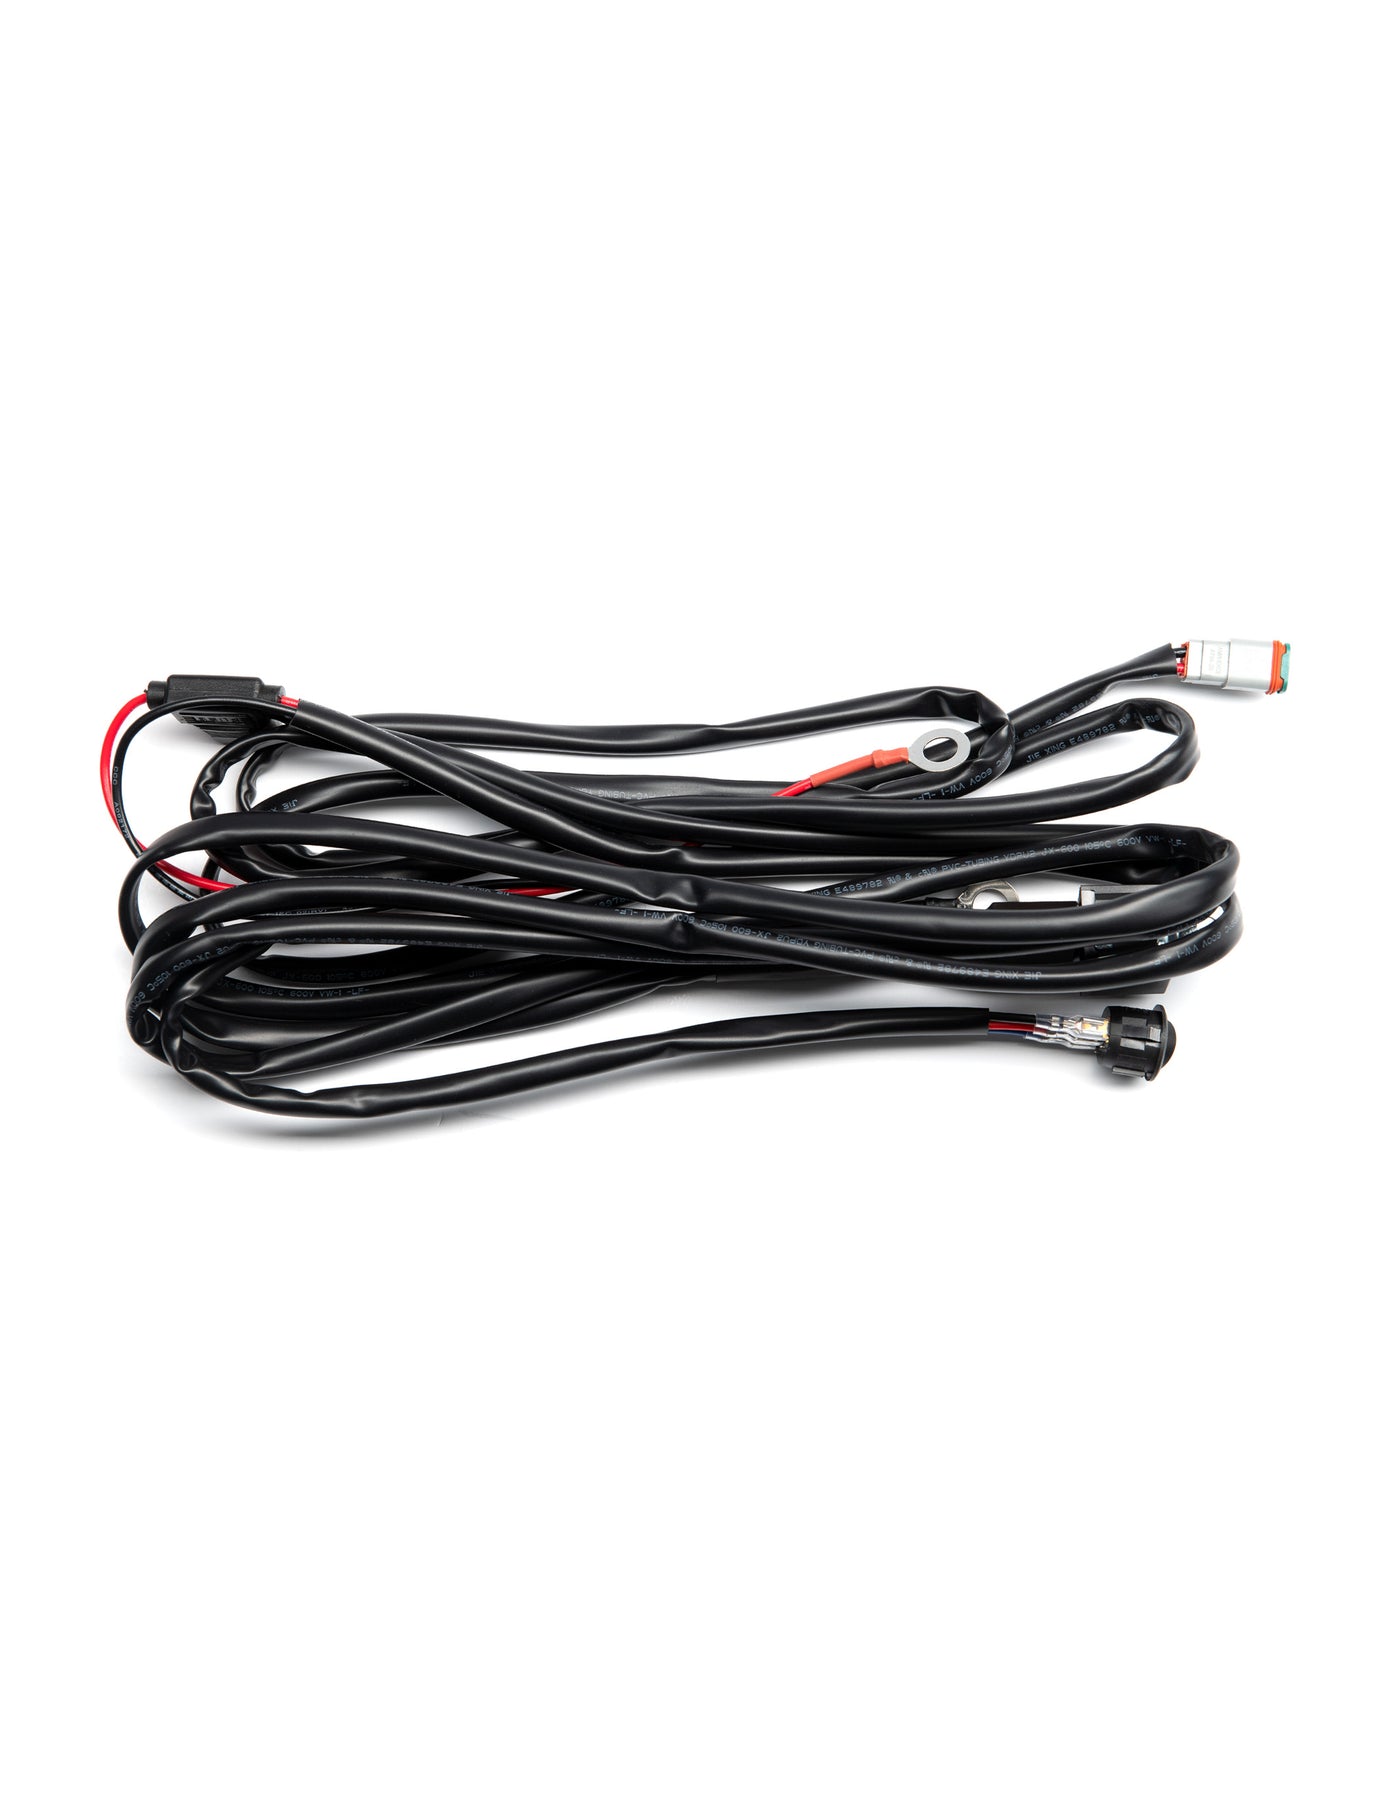 10" or 20" light bar Deutch connector wiring harness with switch - North Lights